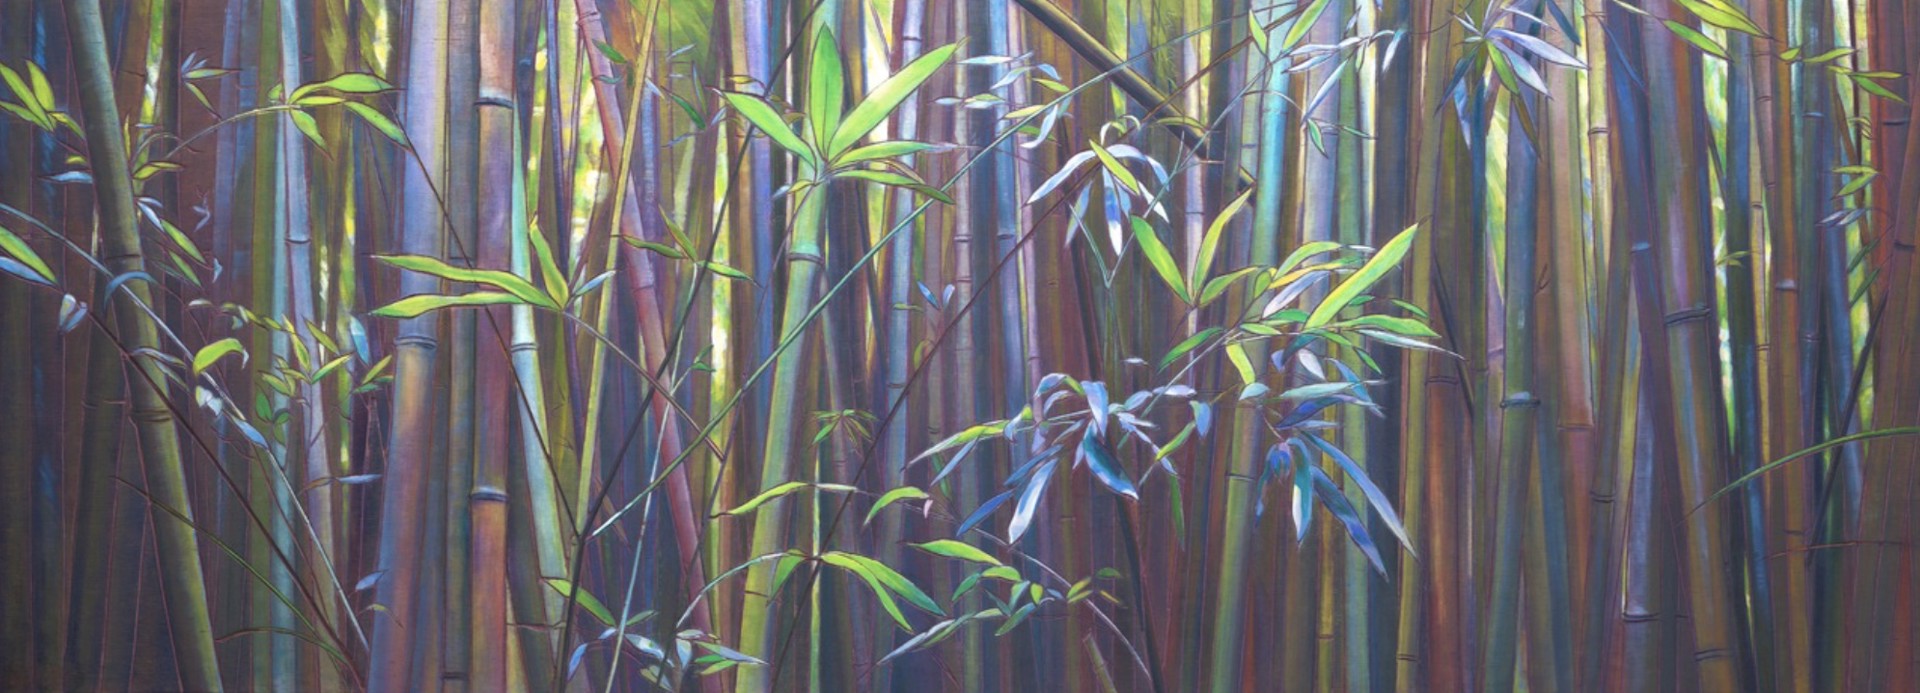 Whispering Light of Bamboo by Joelle C.